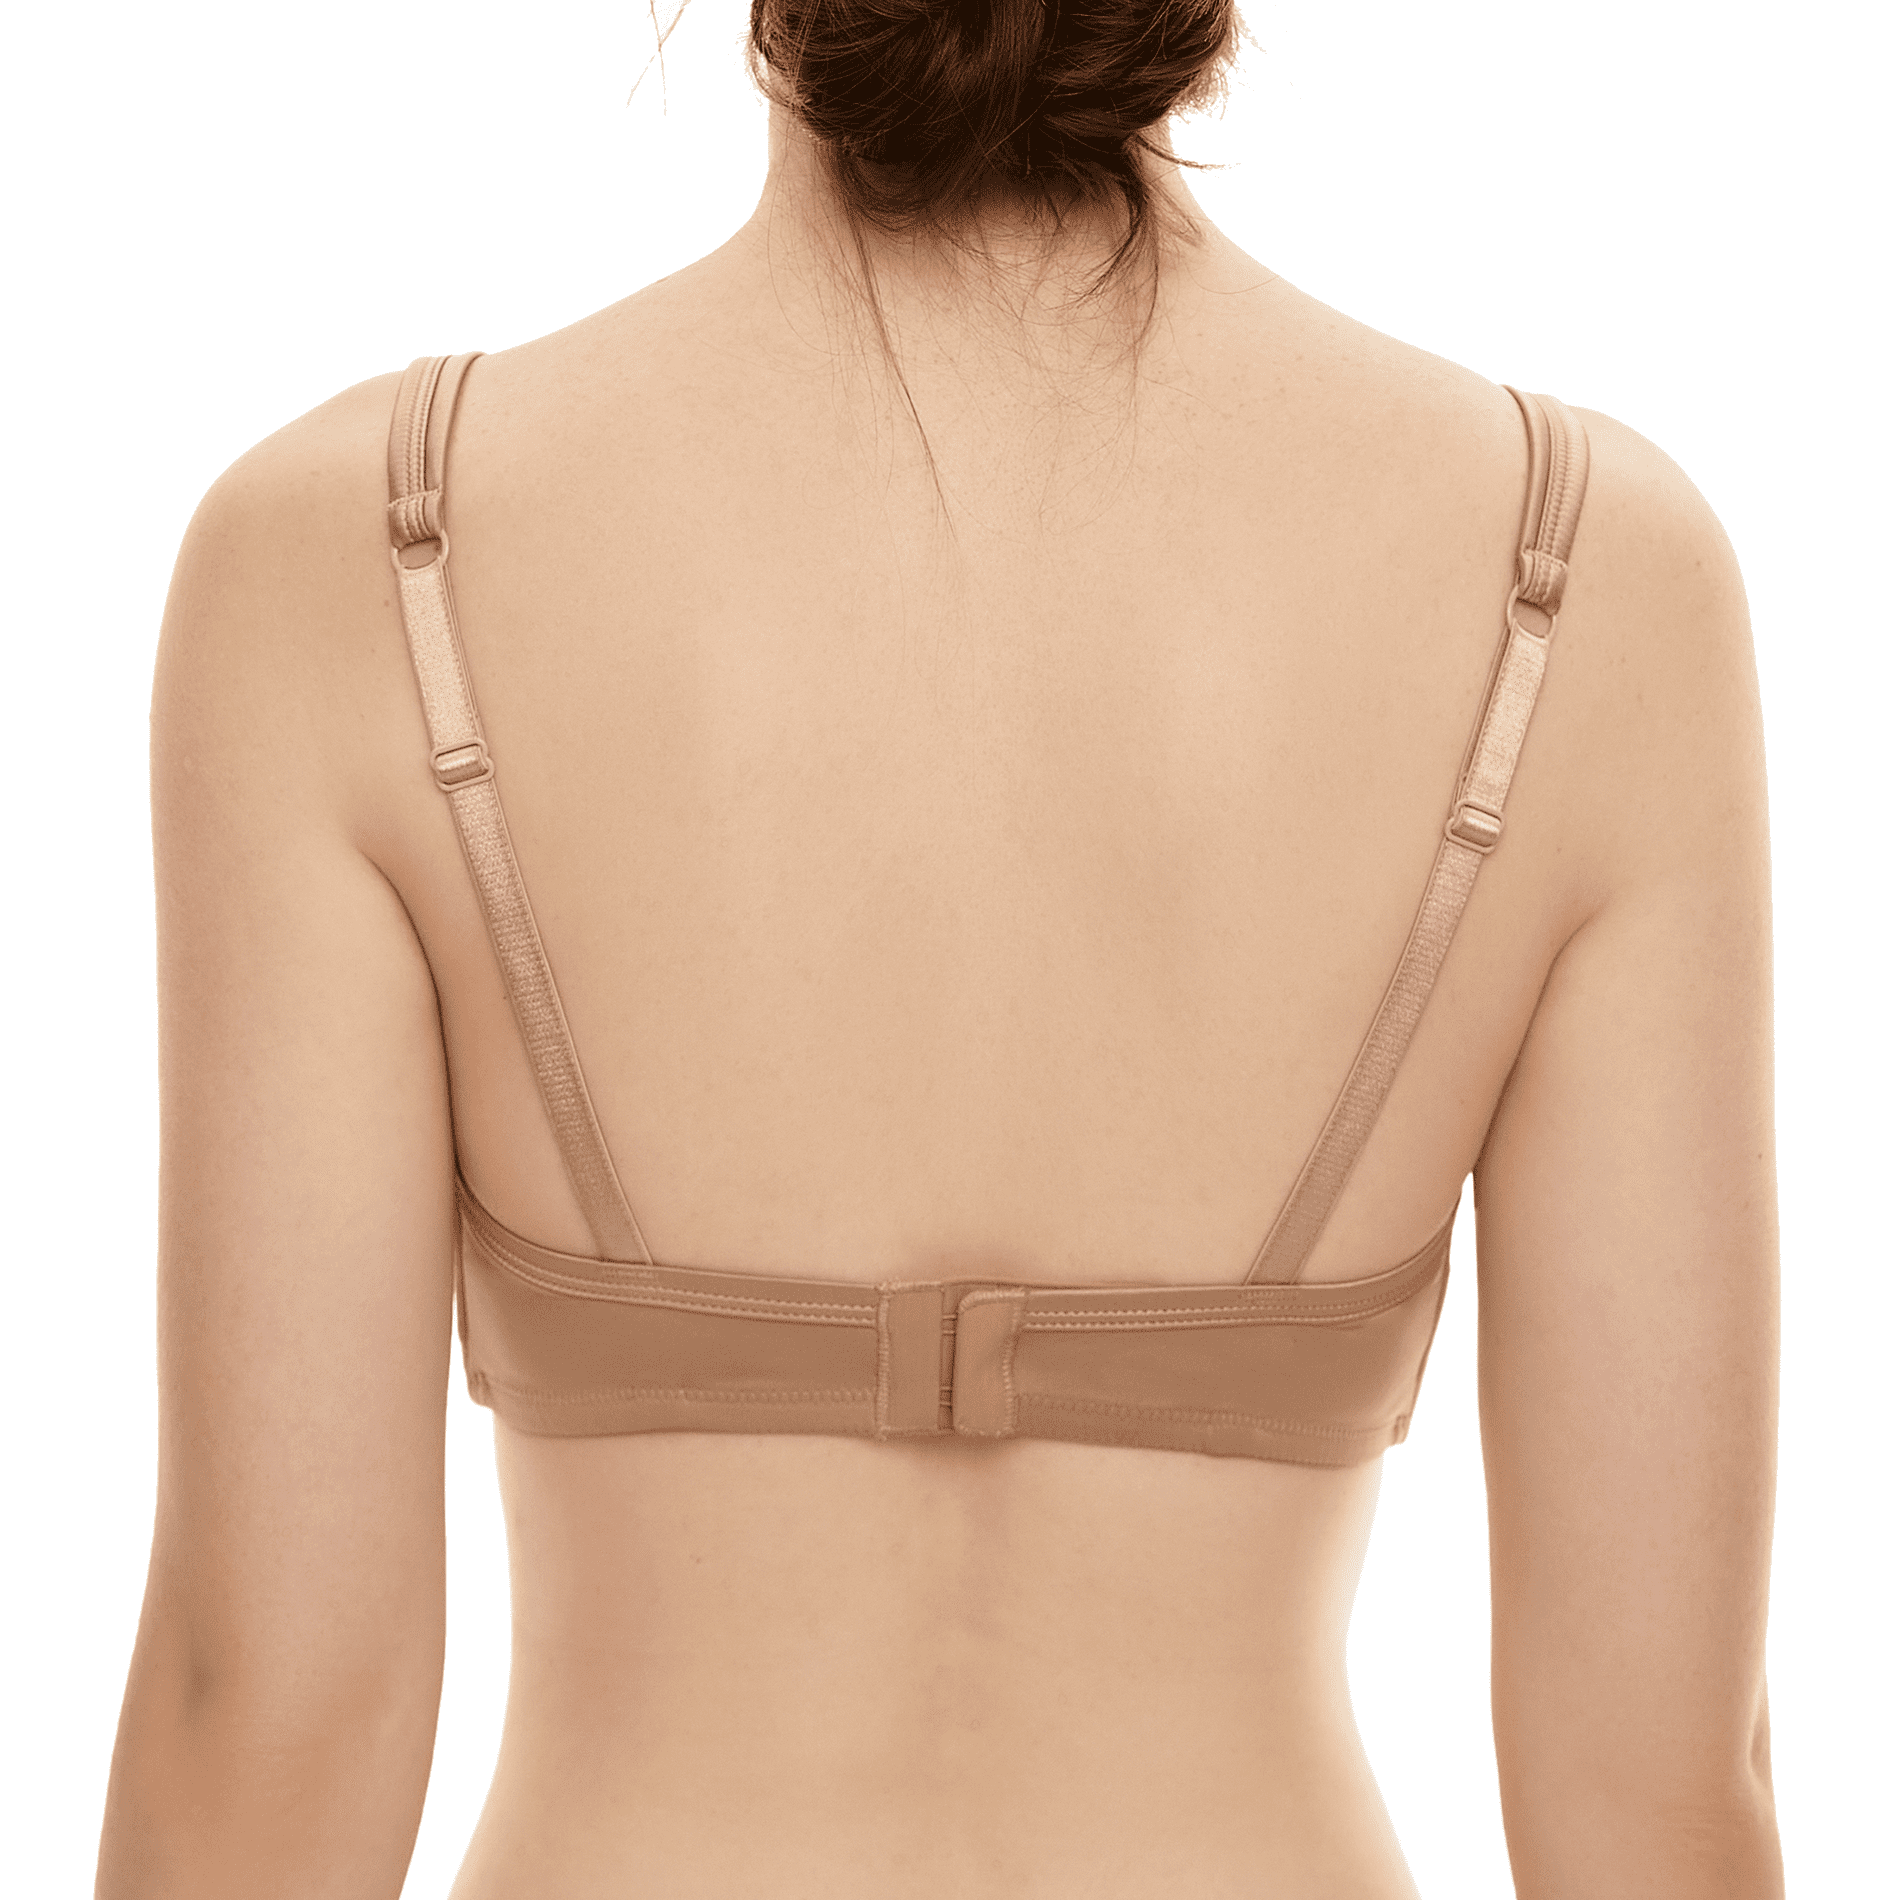 BIMEI Mastectomy Bra with Pockets for Breast Prosthesis Women's Full  Coverage Wirefree Everyday Bra plus size 8102,Beige,40A